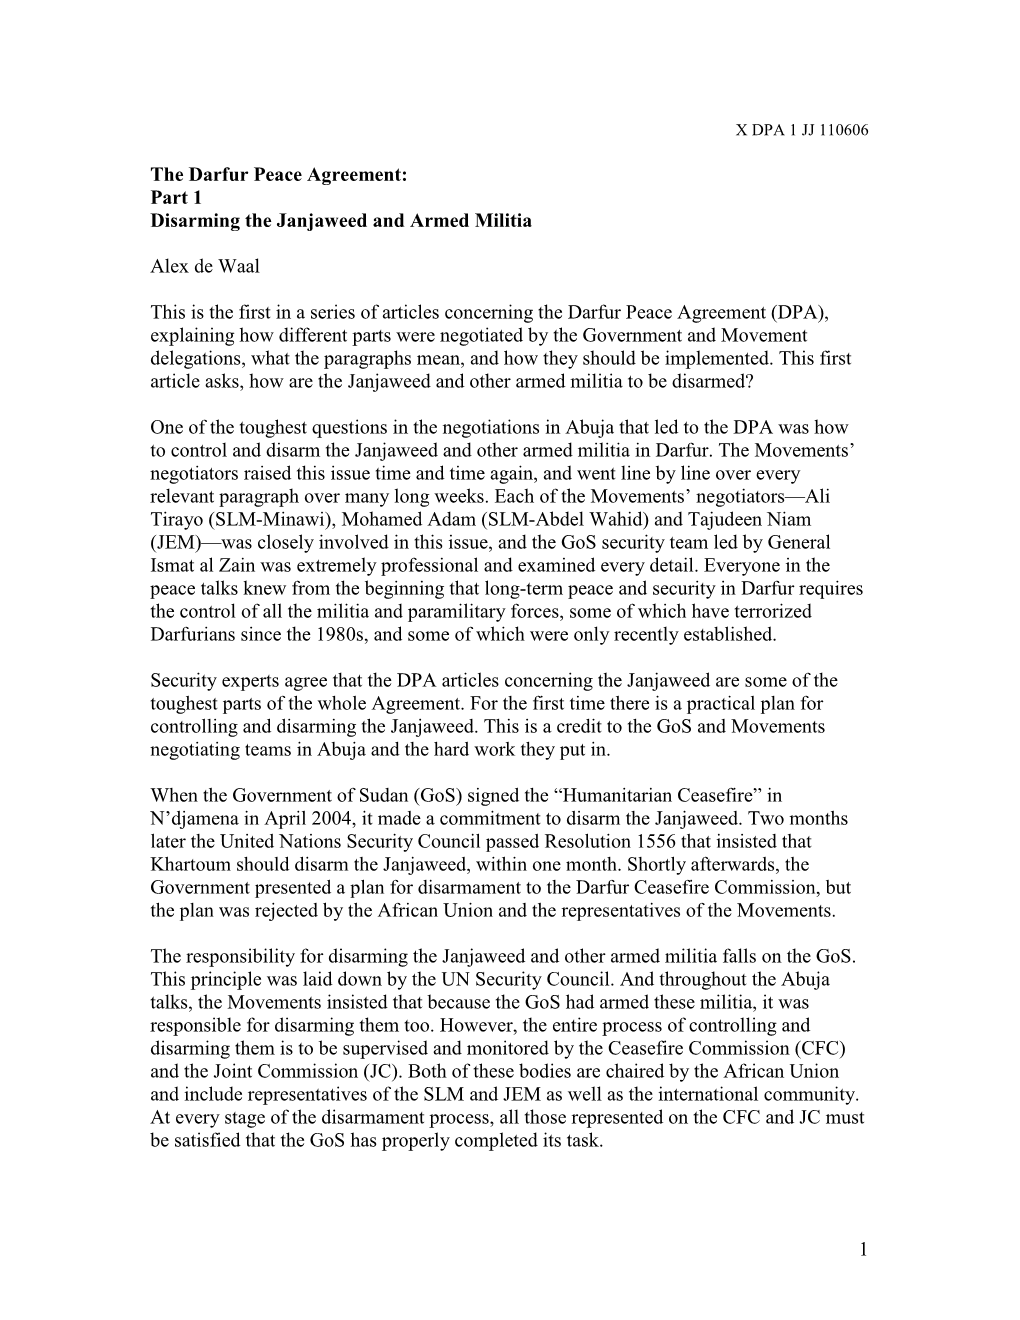 1 the Darfur Peace Agreement: Part 1 Disarming the Janjaweed And